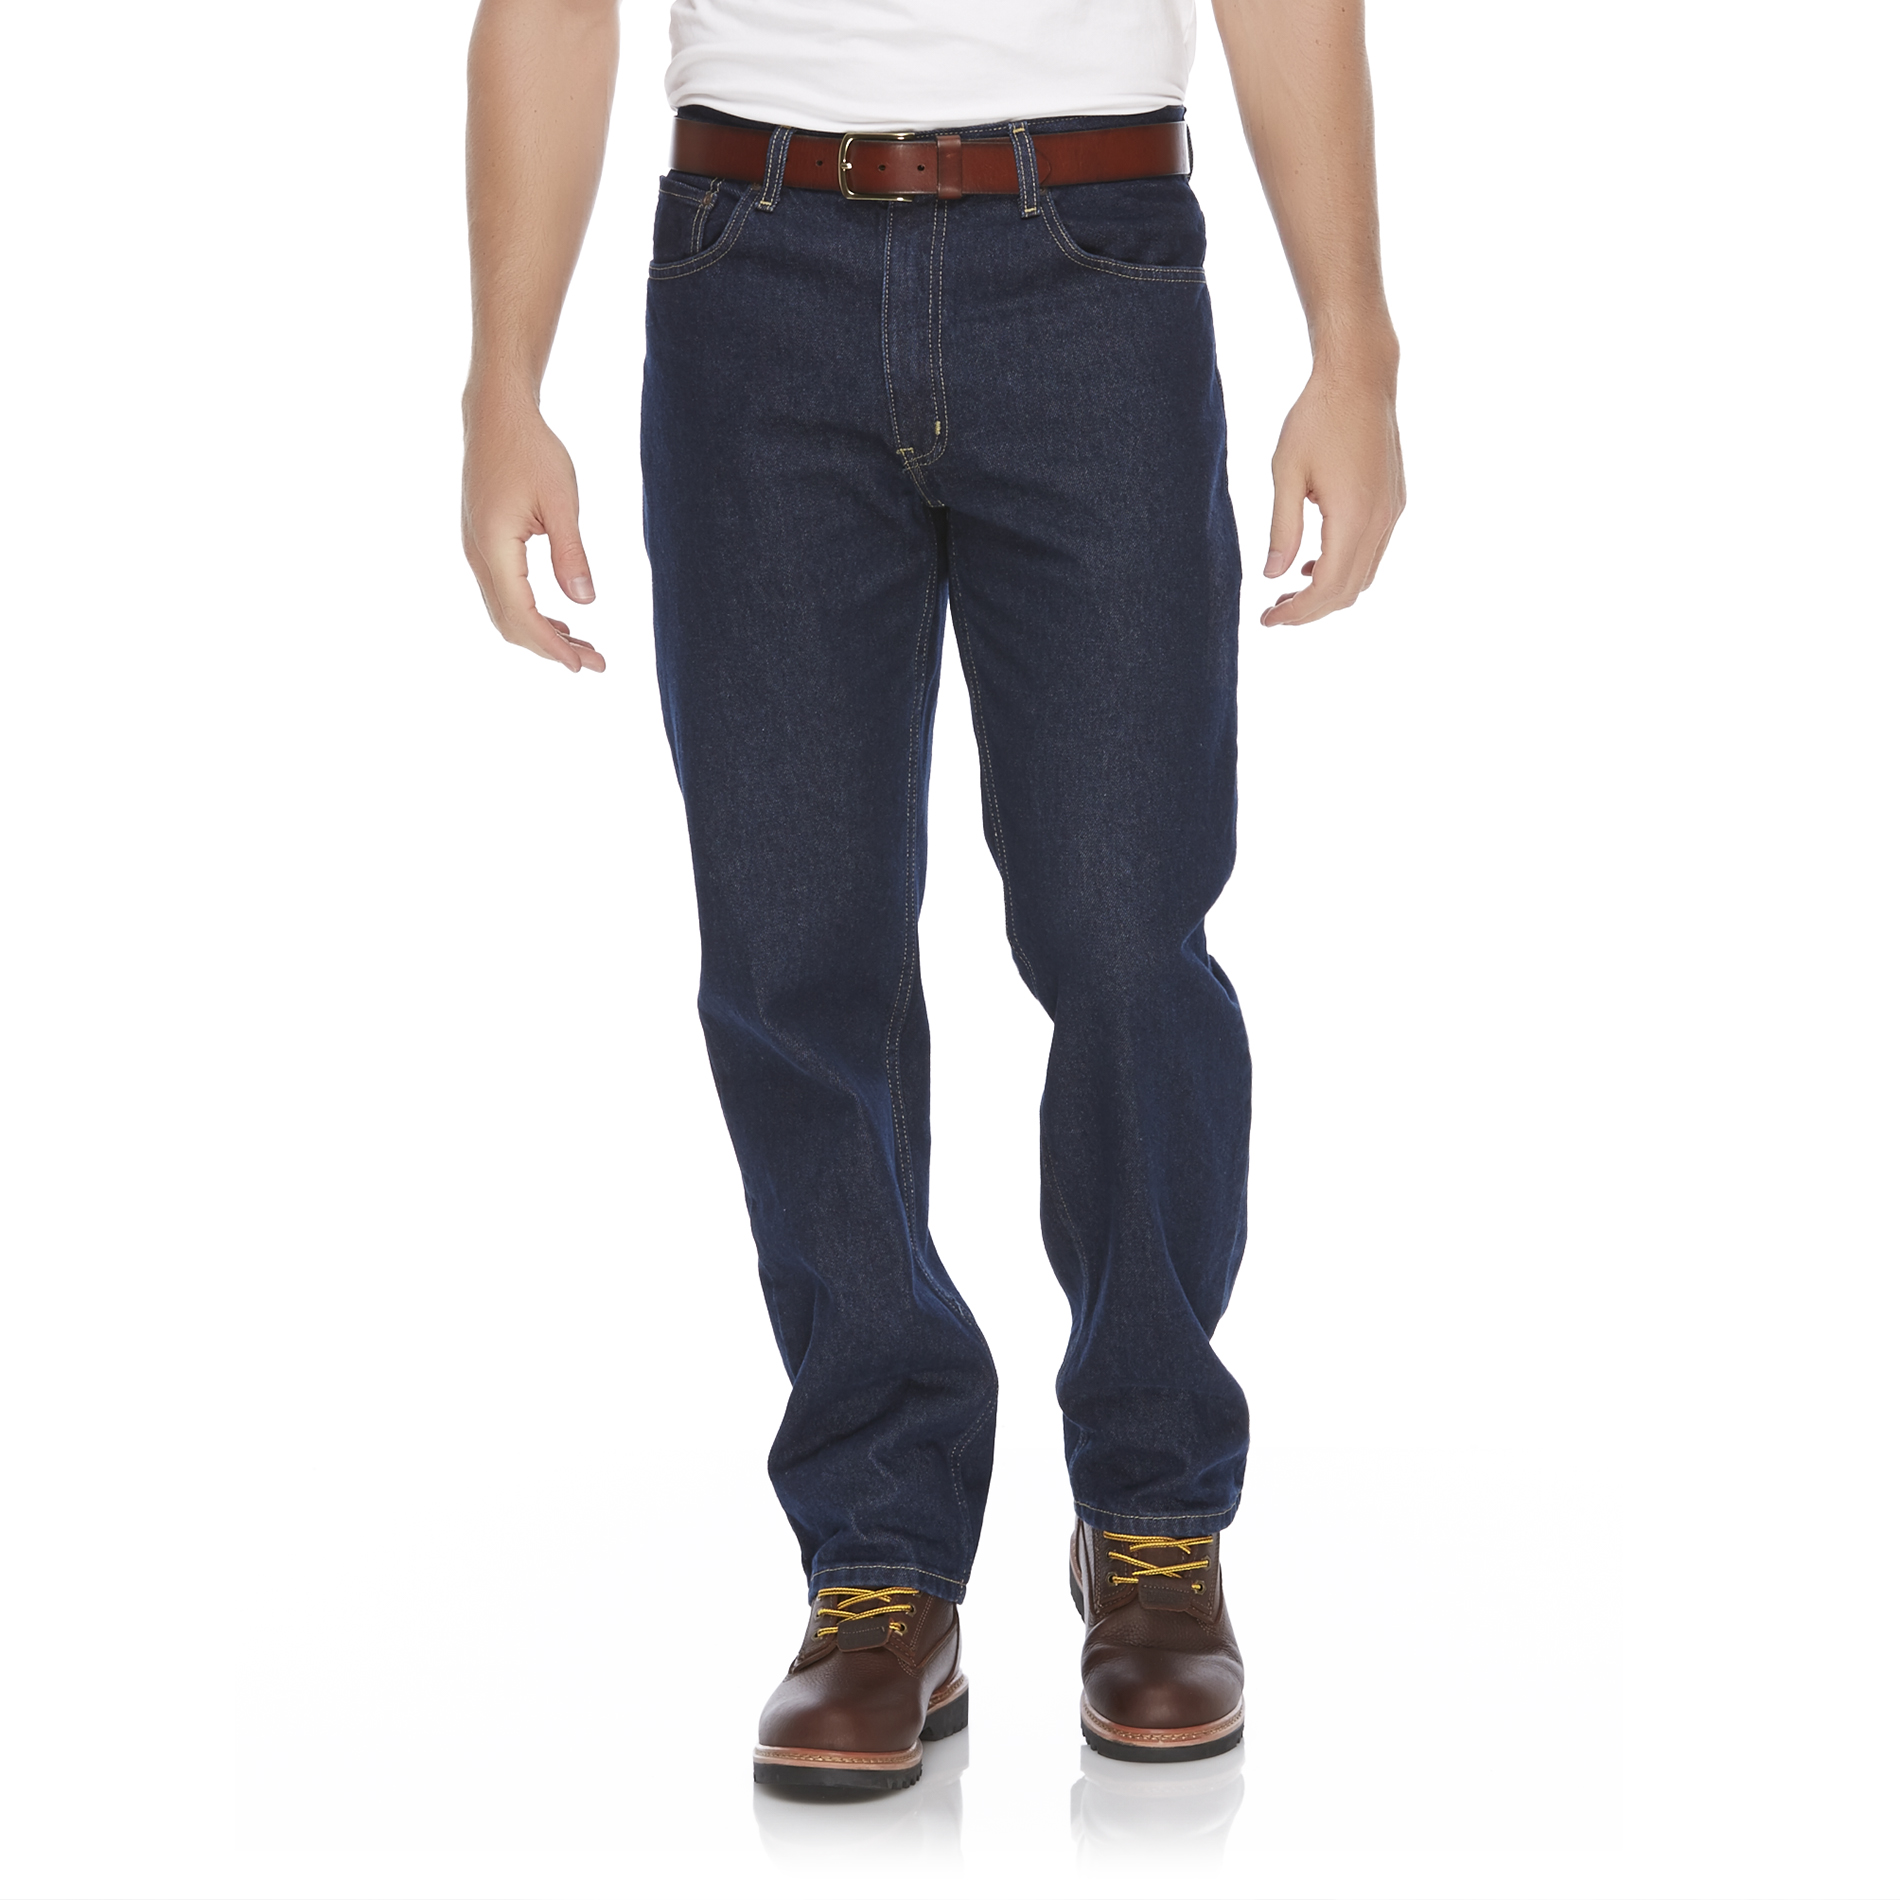 Outdoor Life Men's Relaxed Fit Straight Leg Jeans | Shop Your Way ...